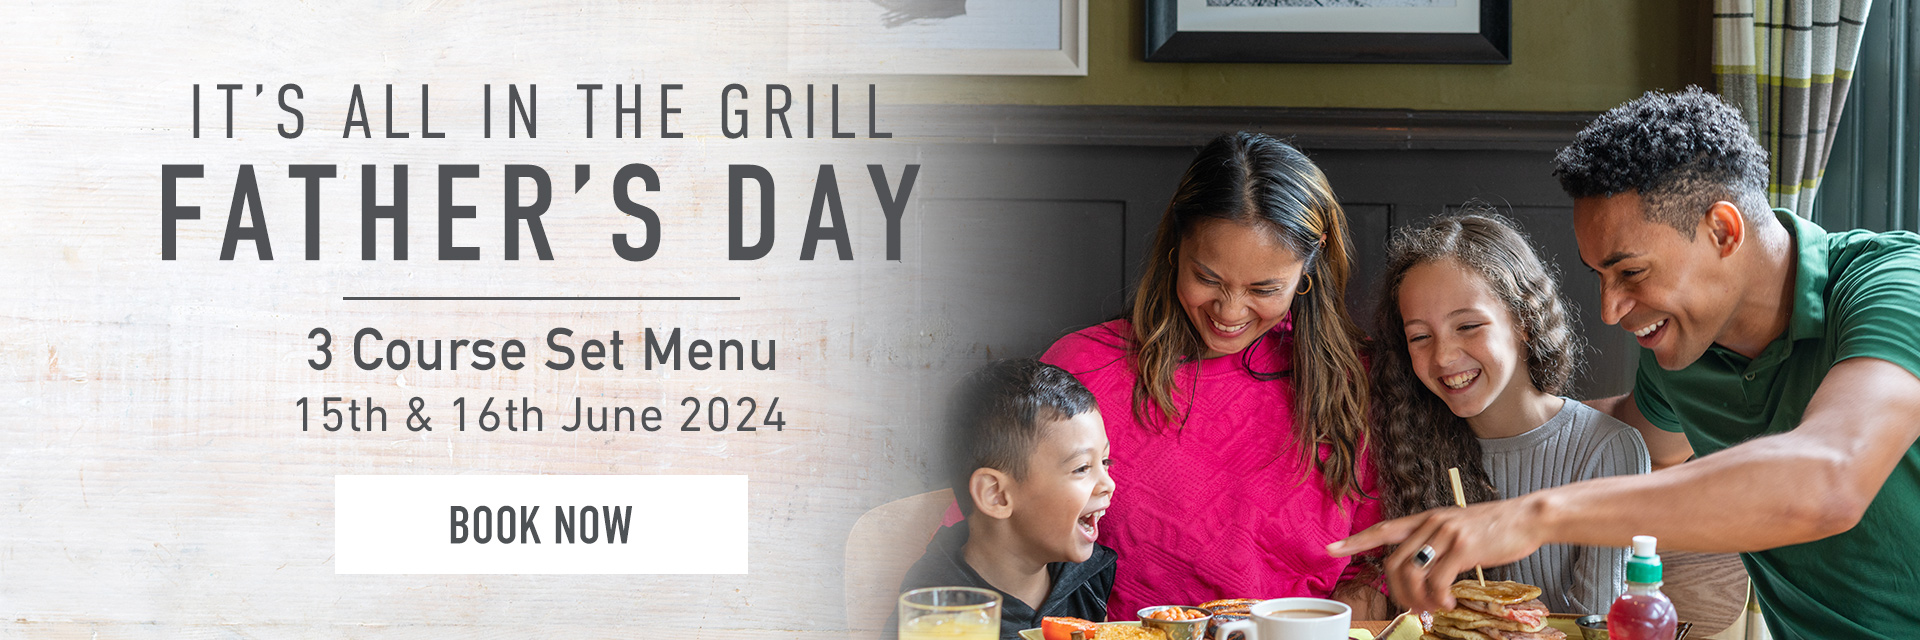 Father’s Day at Harvester Newport Retail Park